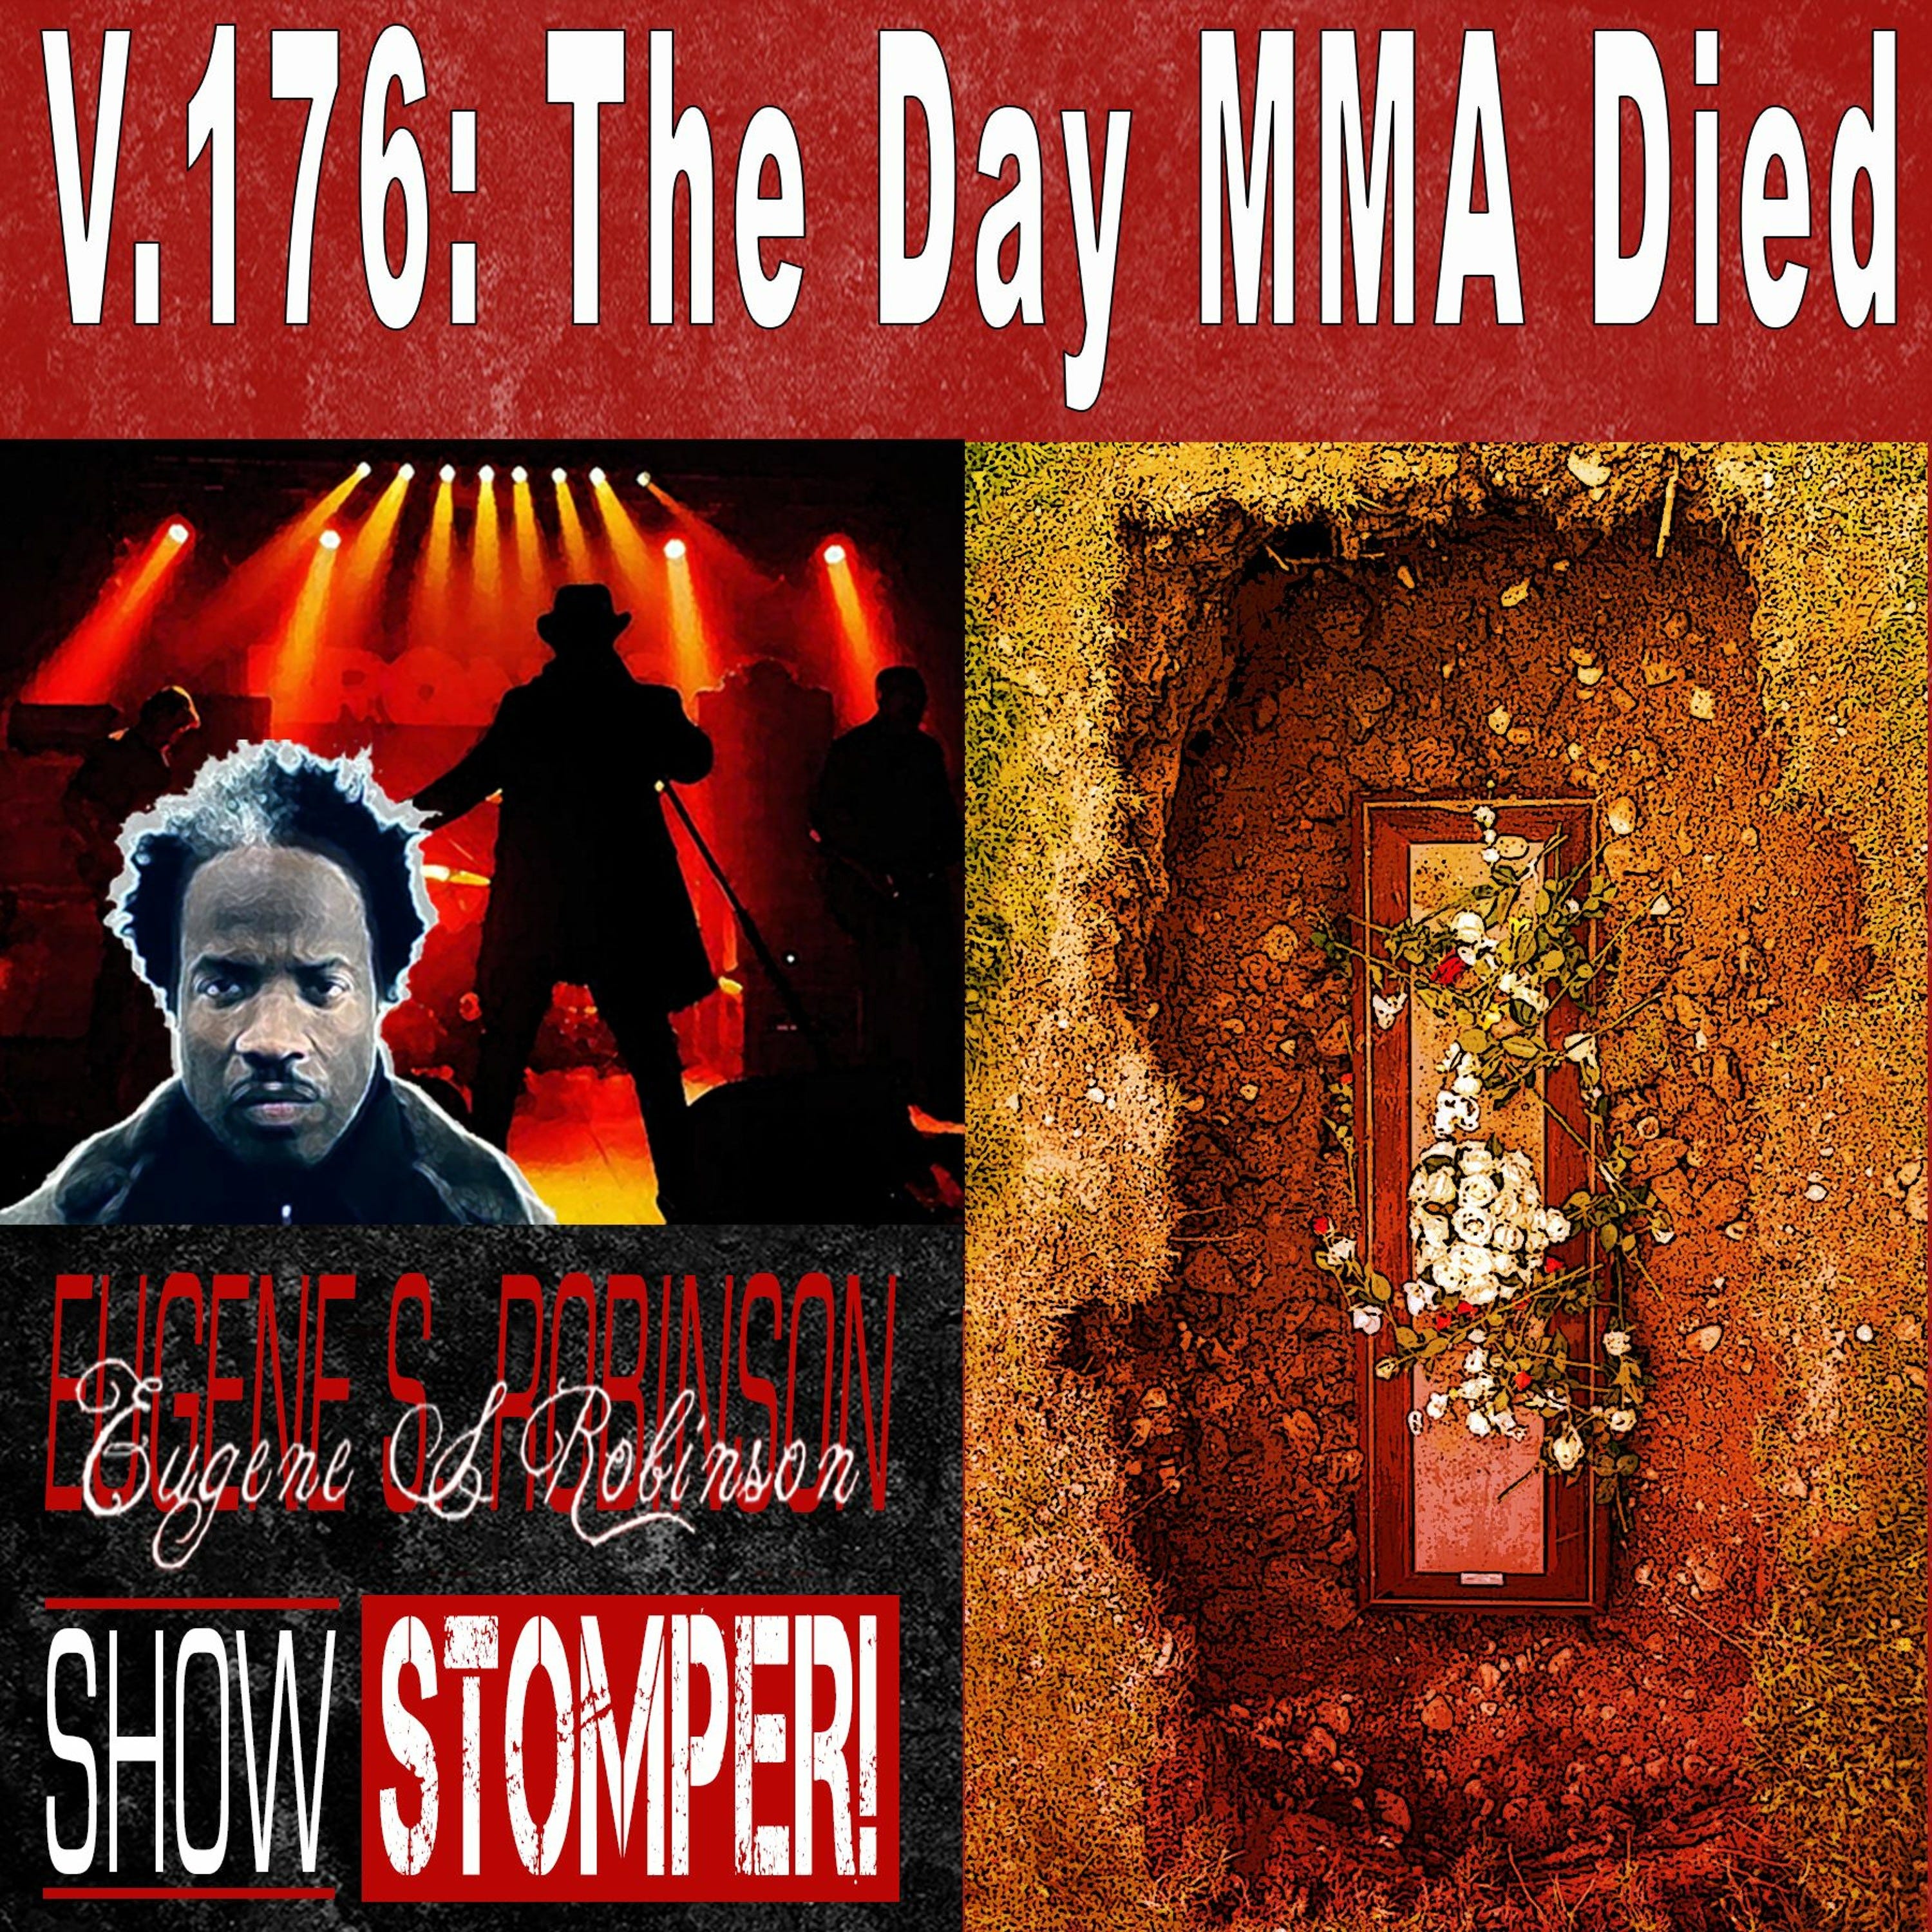 V.176 The Day MMA Died On The Eugene S. Robinson Show Stomper!